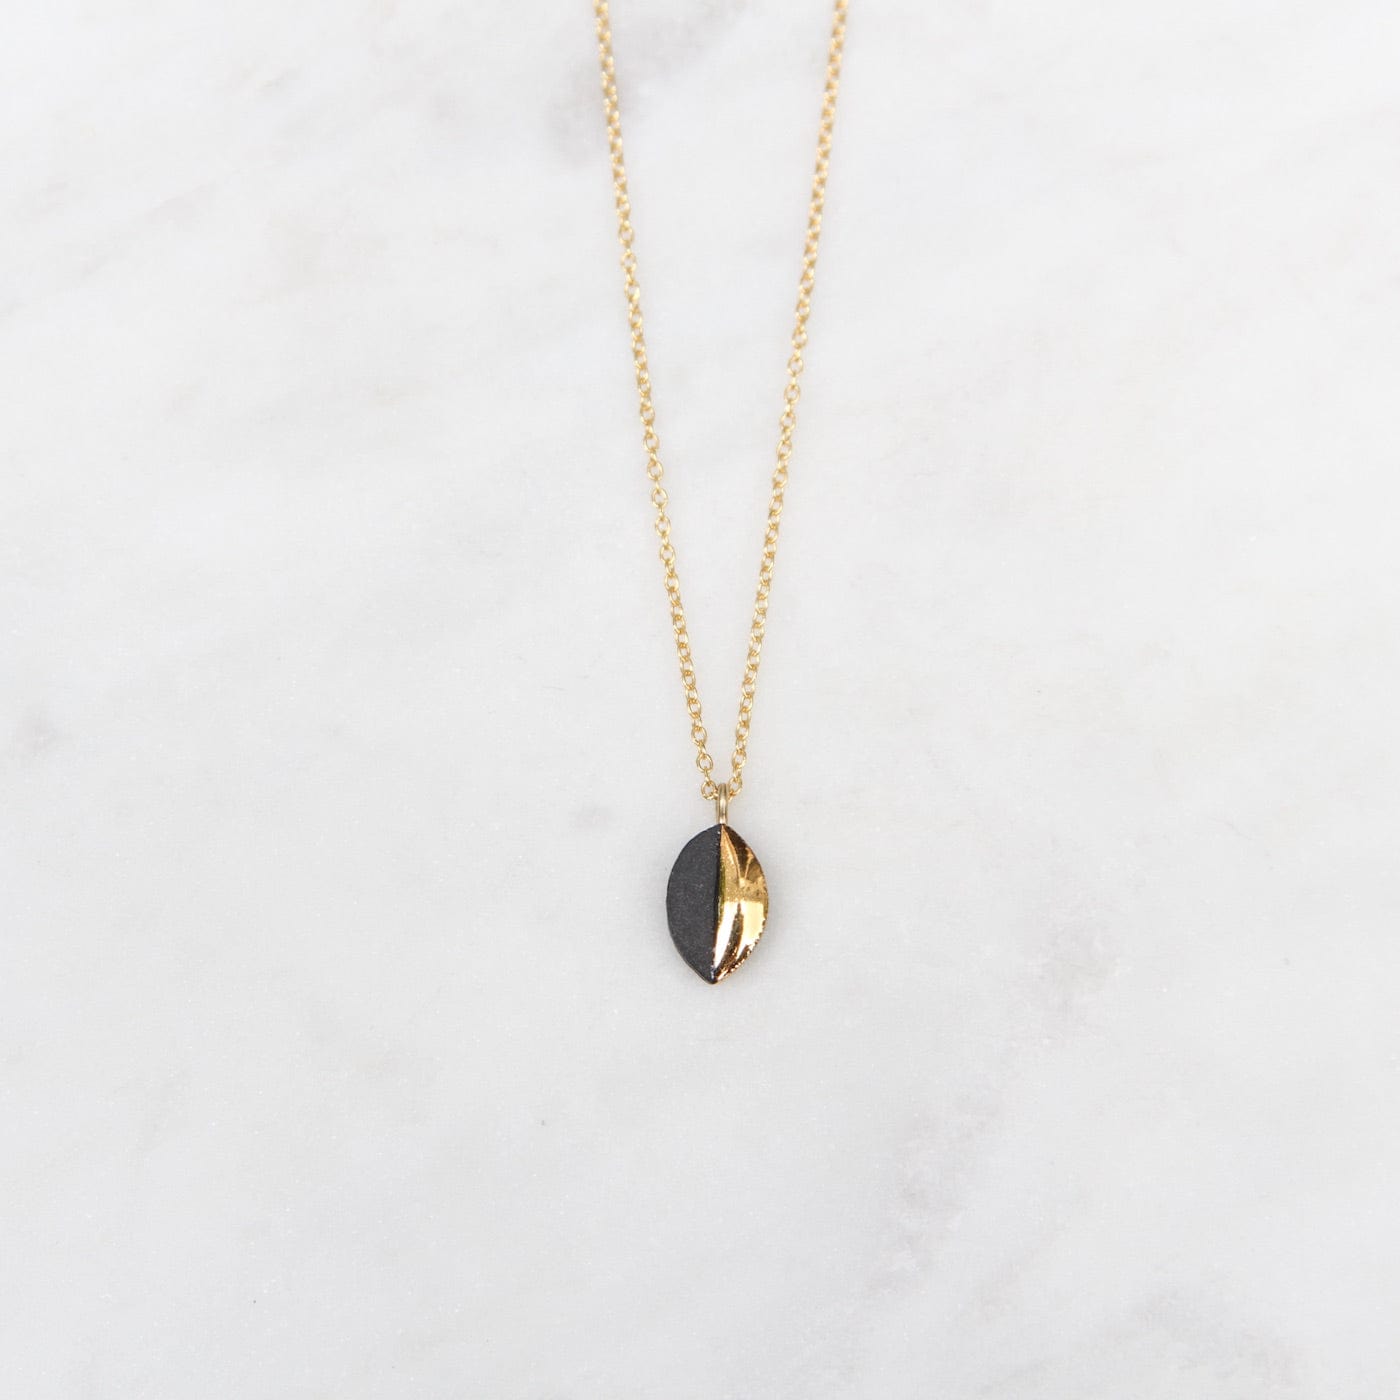 NKL-GF Black Gold Dipped Mini Marquise Necklace